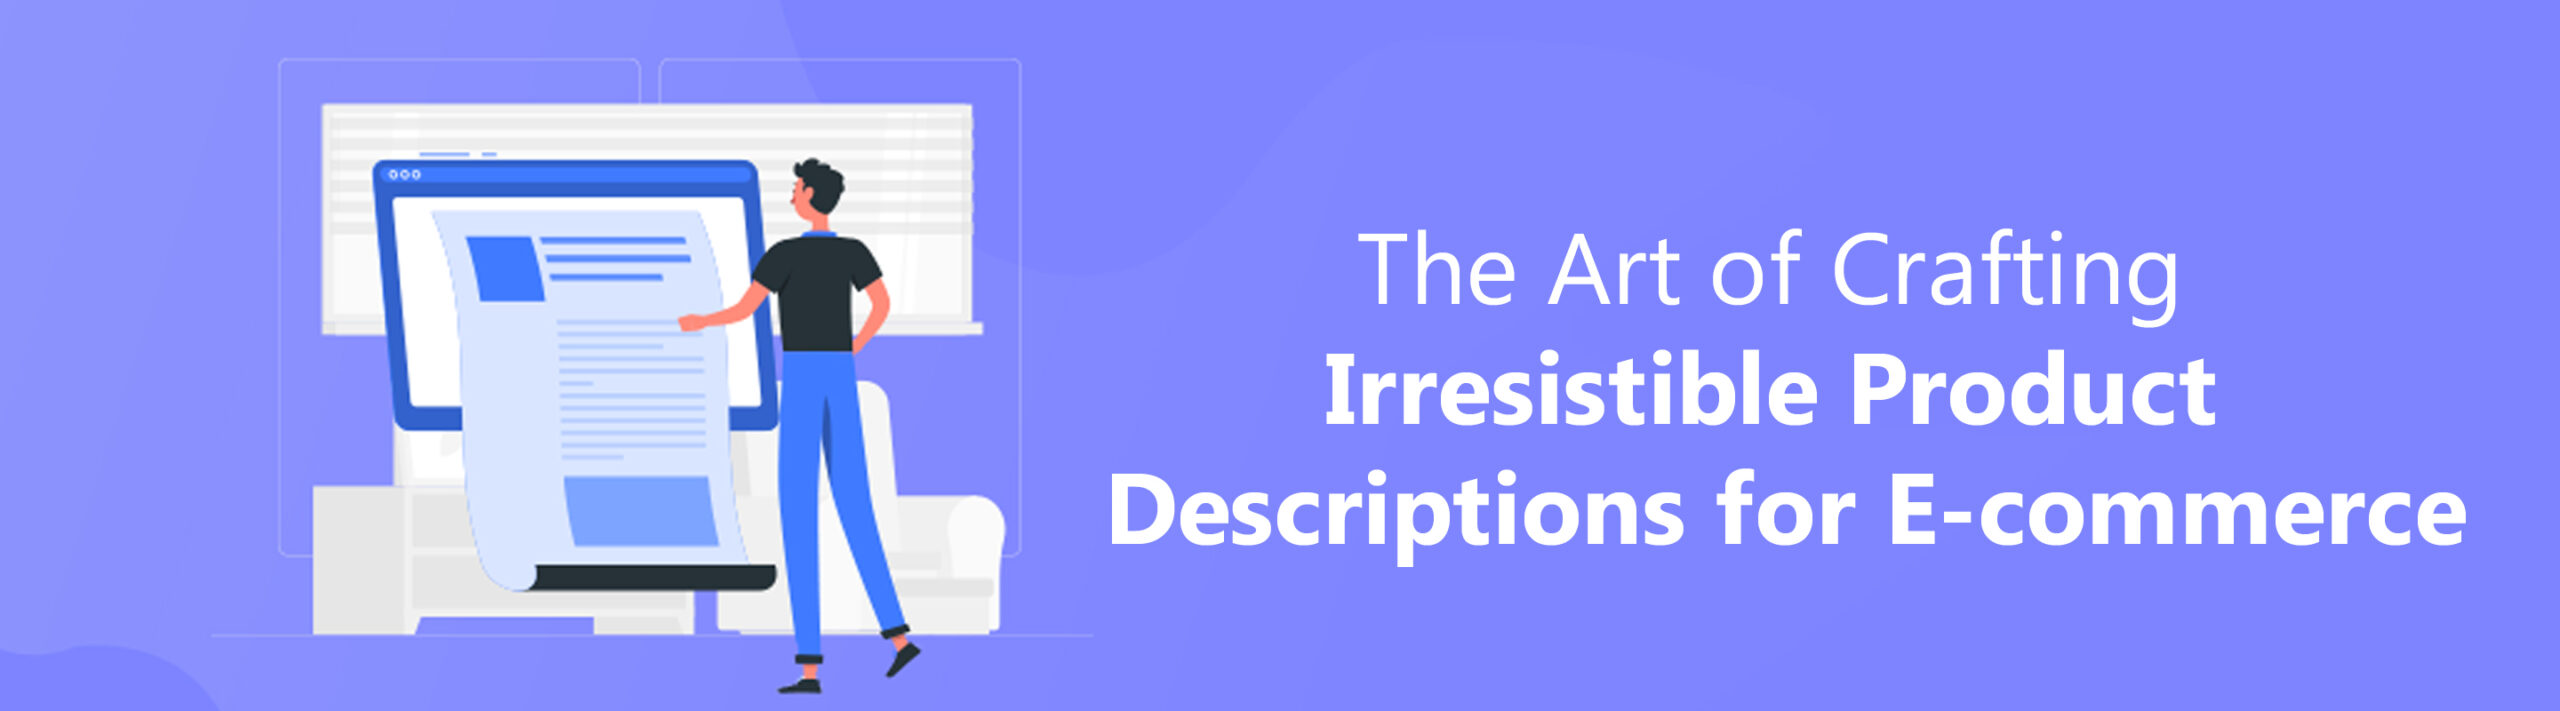 THE ART OF CRAFTING IRRESISTIBLE PRODUCT DESCRIPTIONS FOR ECOMMERCE